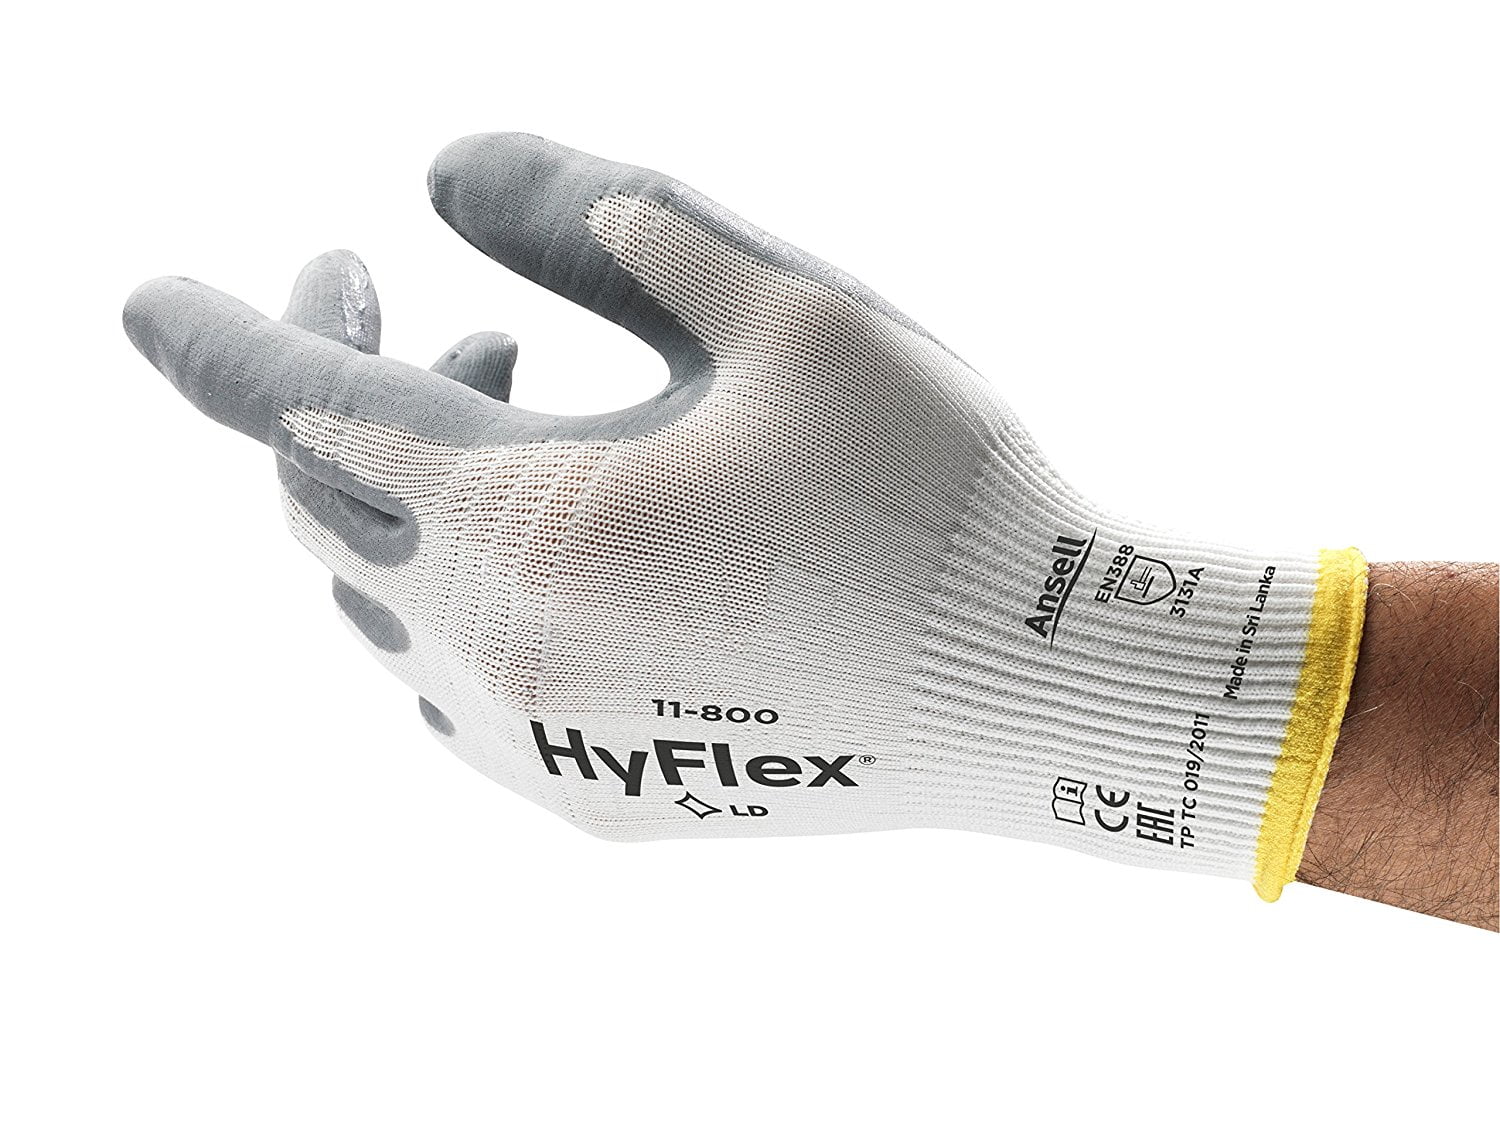 9 Length White 5 Wide Ansell 104663 HyFlex Lite 11-600 White Polyurethane Coated Knit Gloves Pack of 12 0.33 Height Size 10